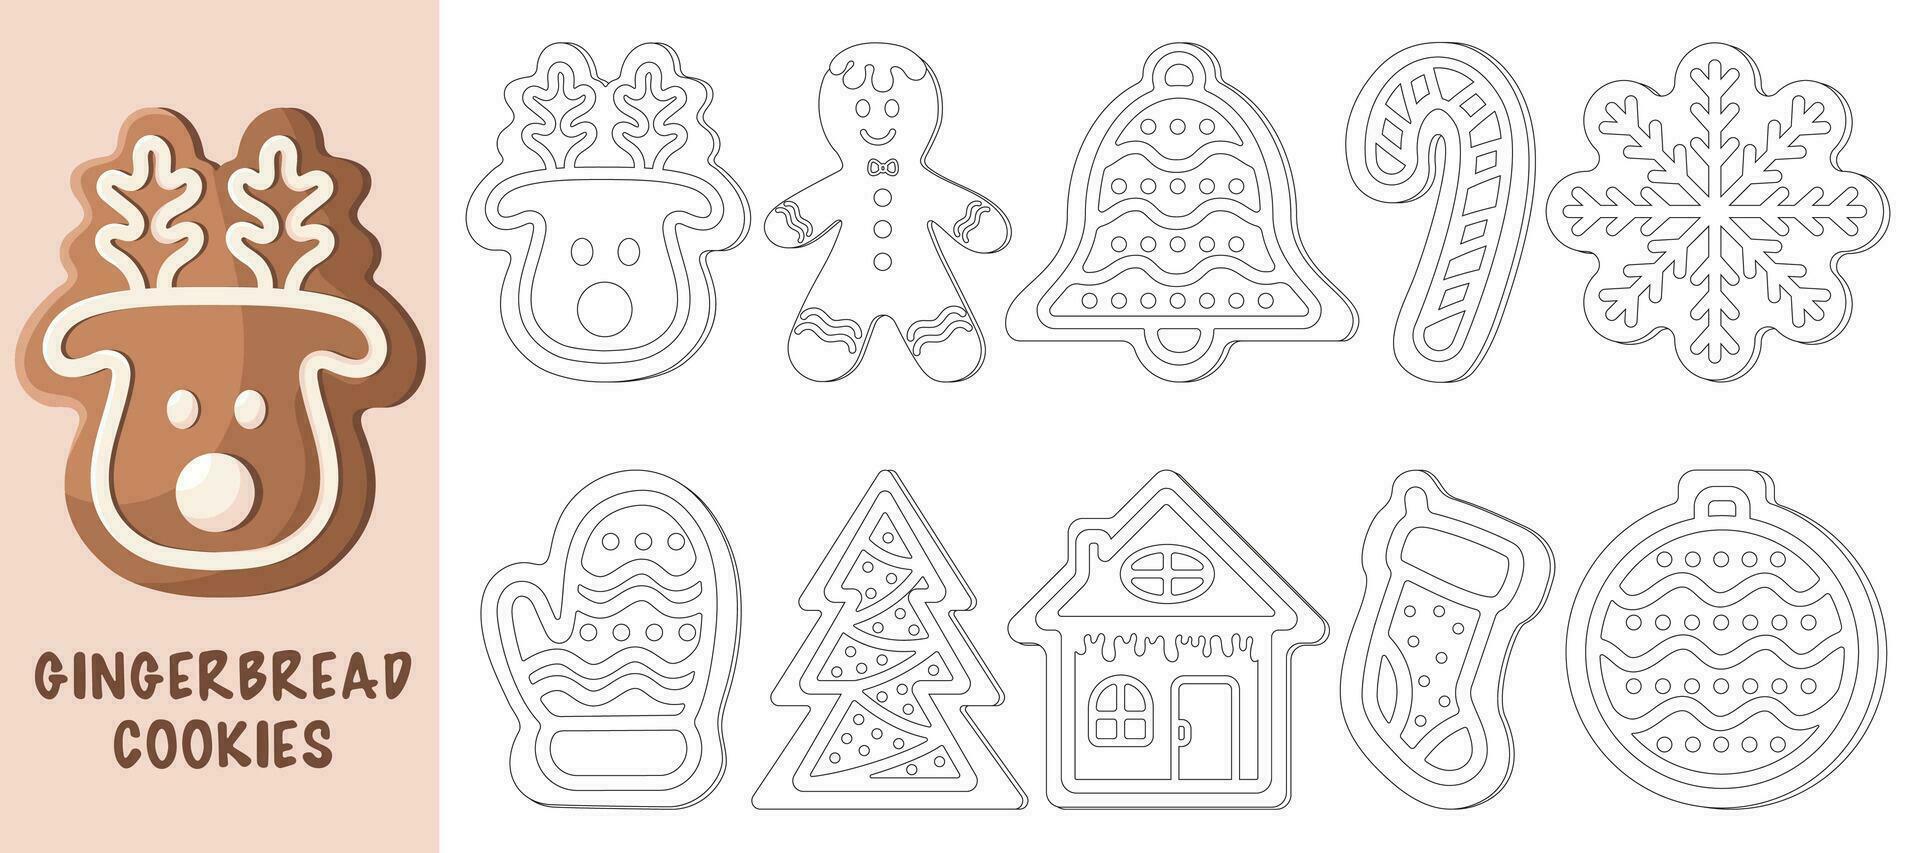 Coloring page with set of gingerbread cookies. Winter homemade sweets in shape of house, mittens, snowflakes, gingerbread man, deer, bell, tree, Christmas tree toy, candy, Christmas sock. vector